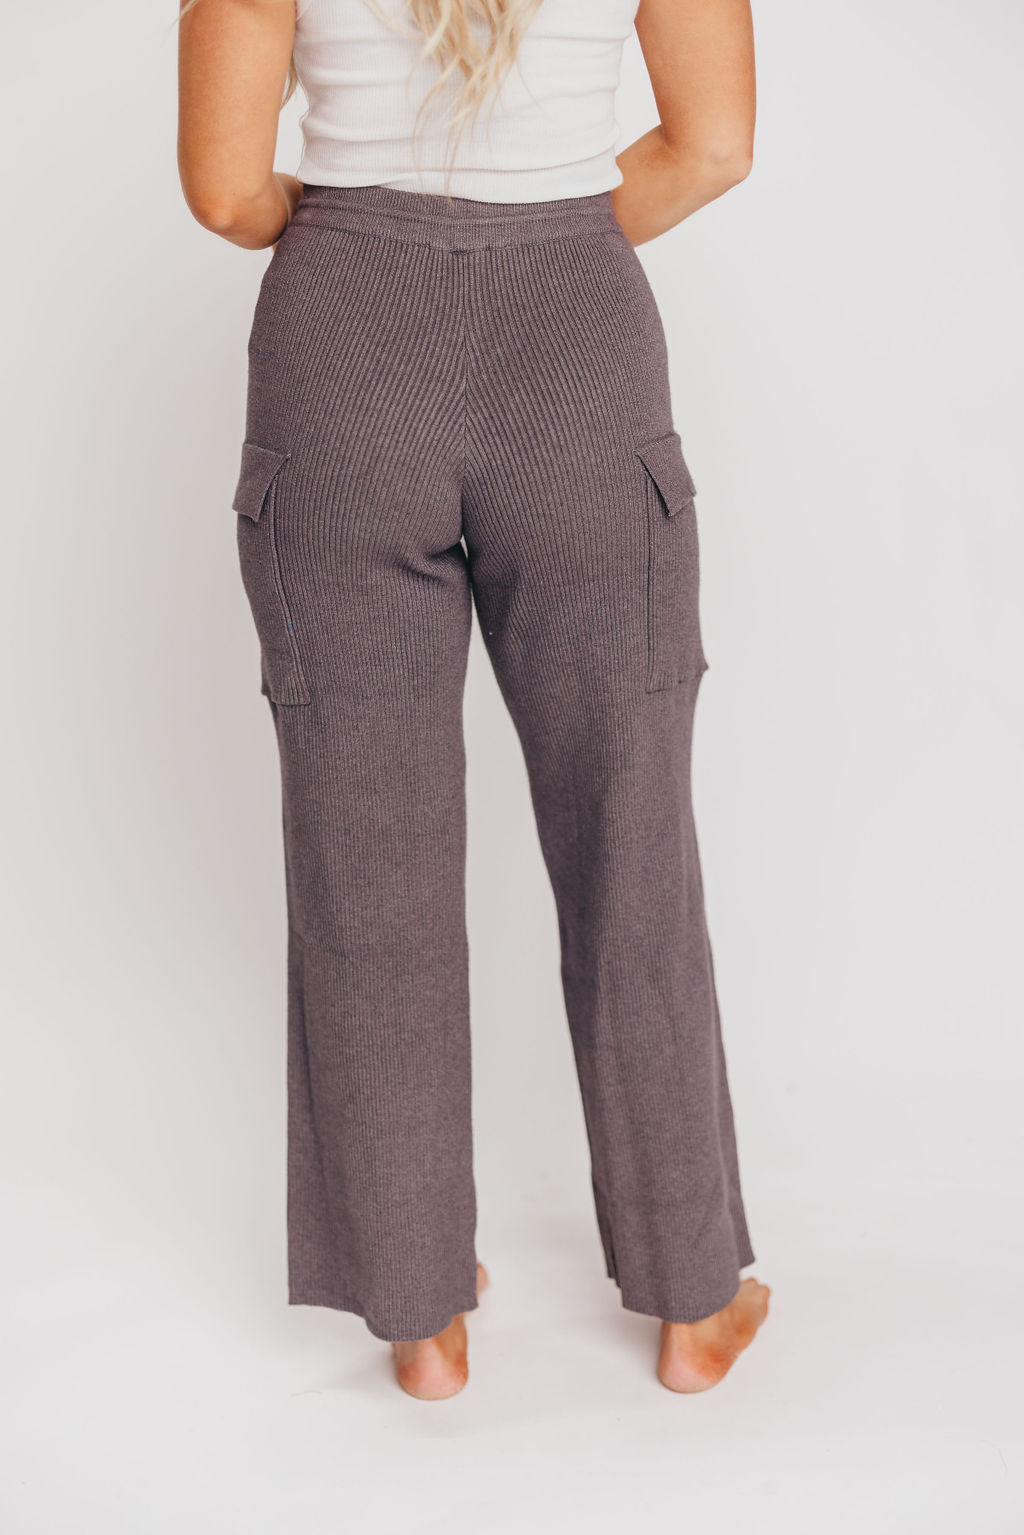 Endsley Rib Knit Utility Pants in Charcoal